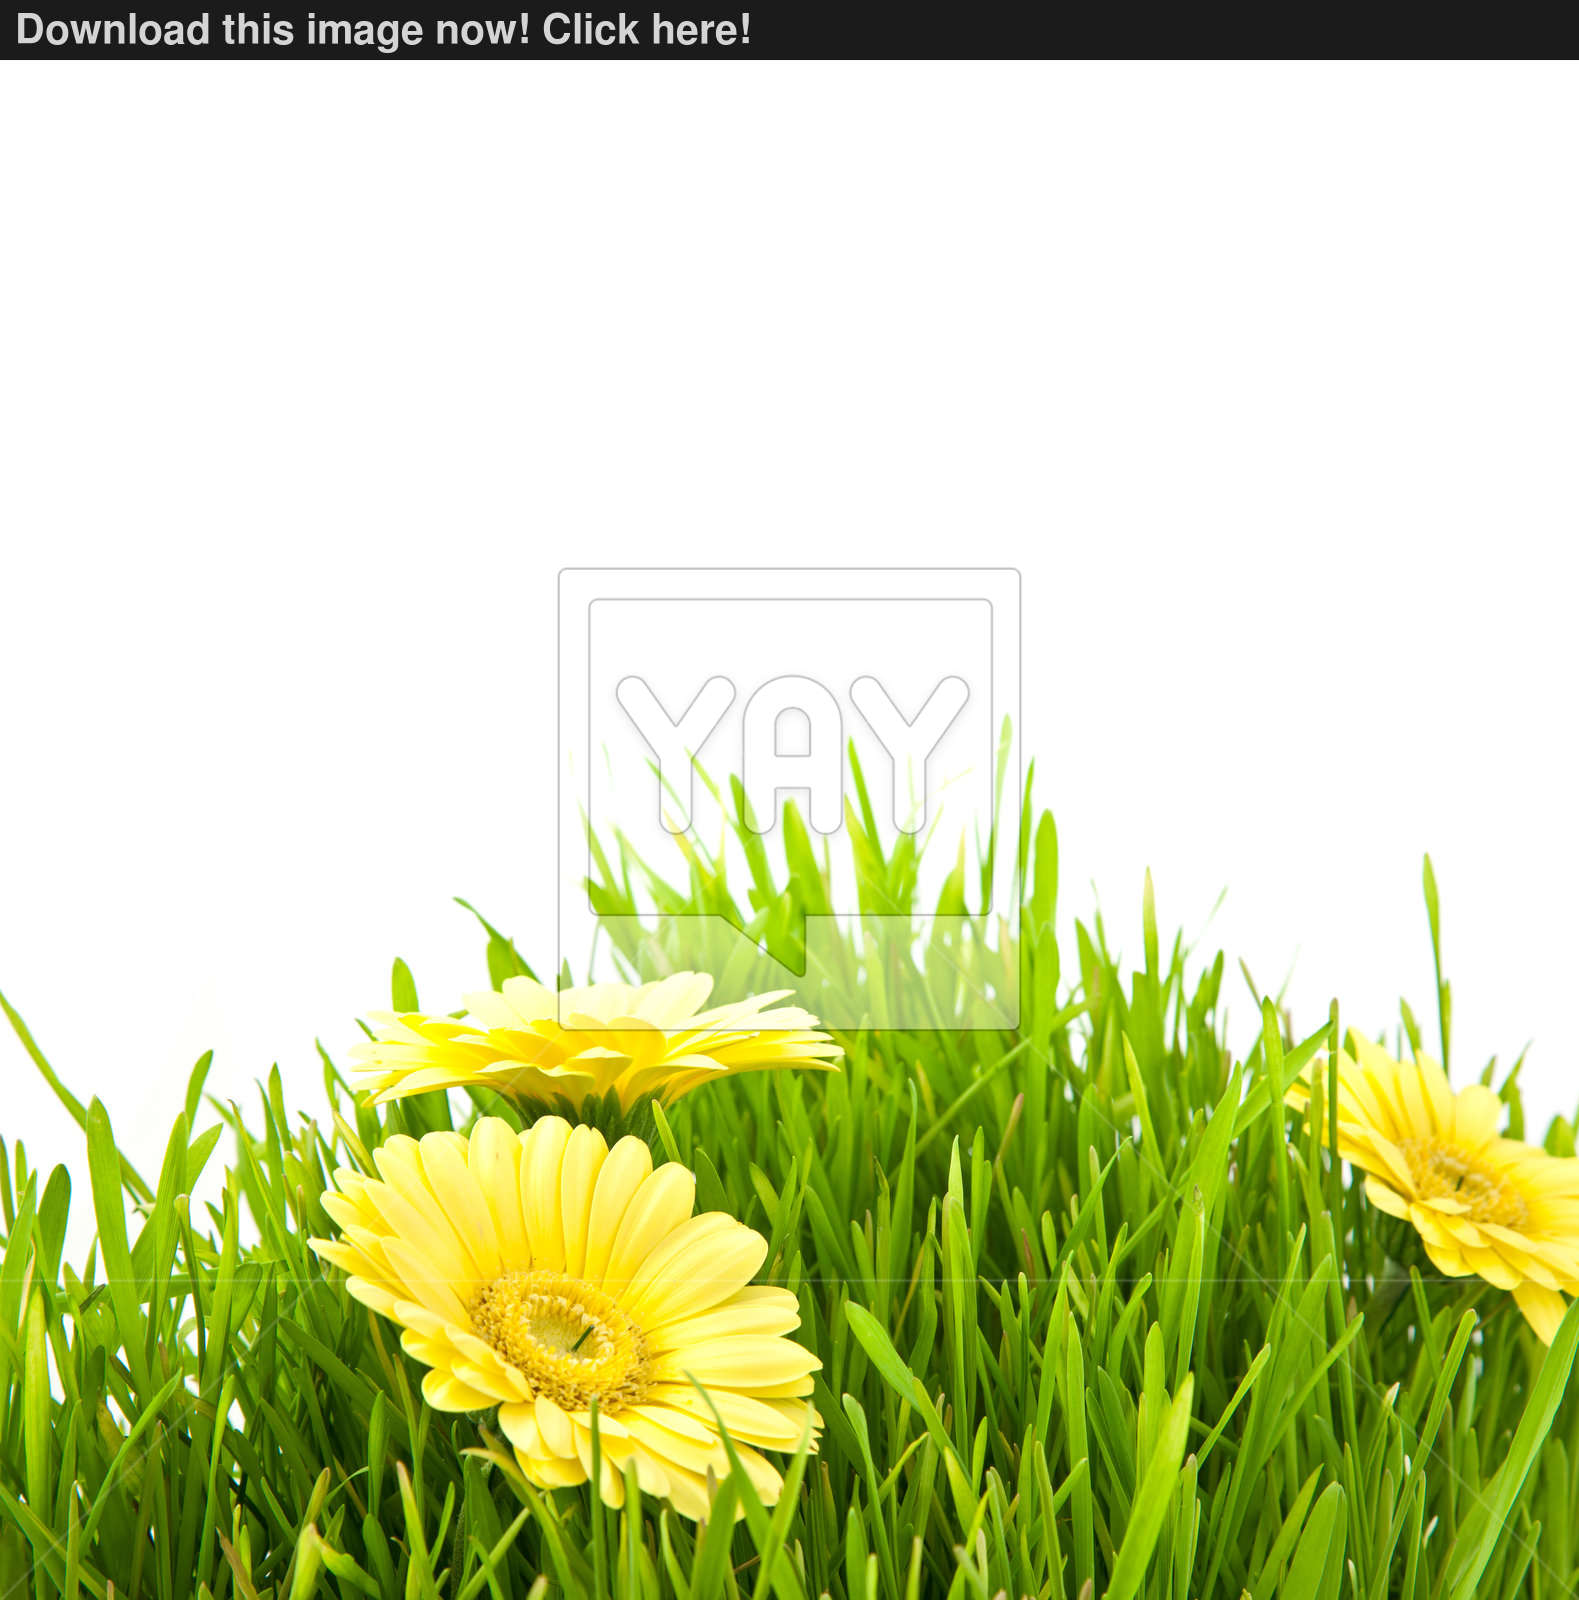 Isolated green grass with yellow flowers image | YayImages.com